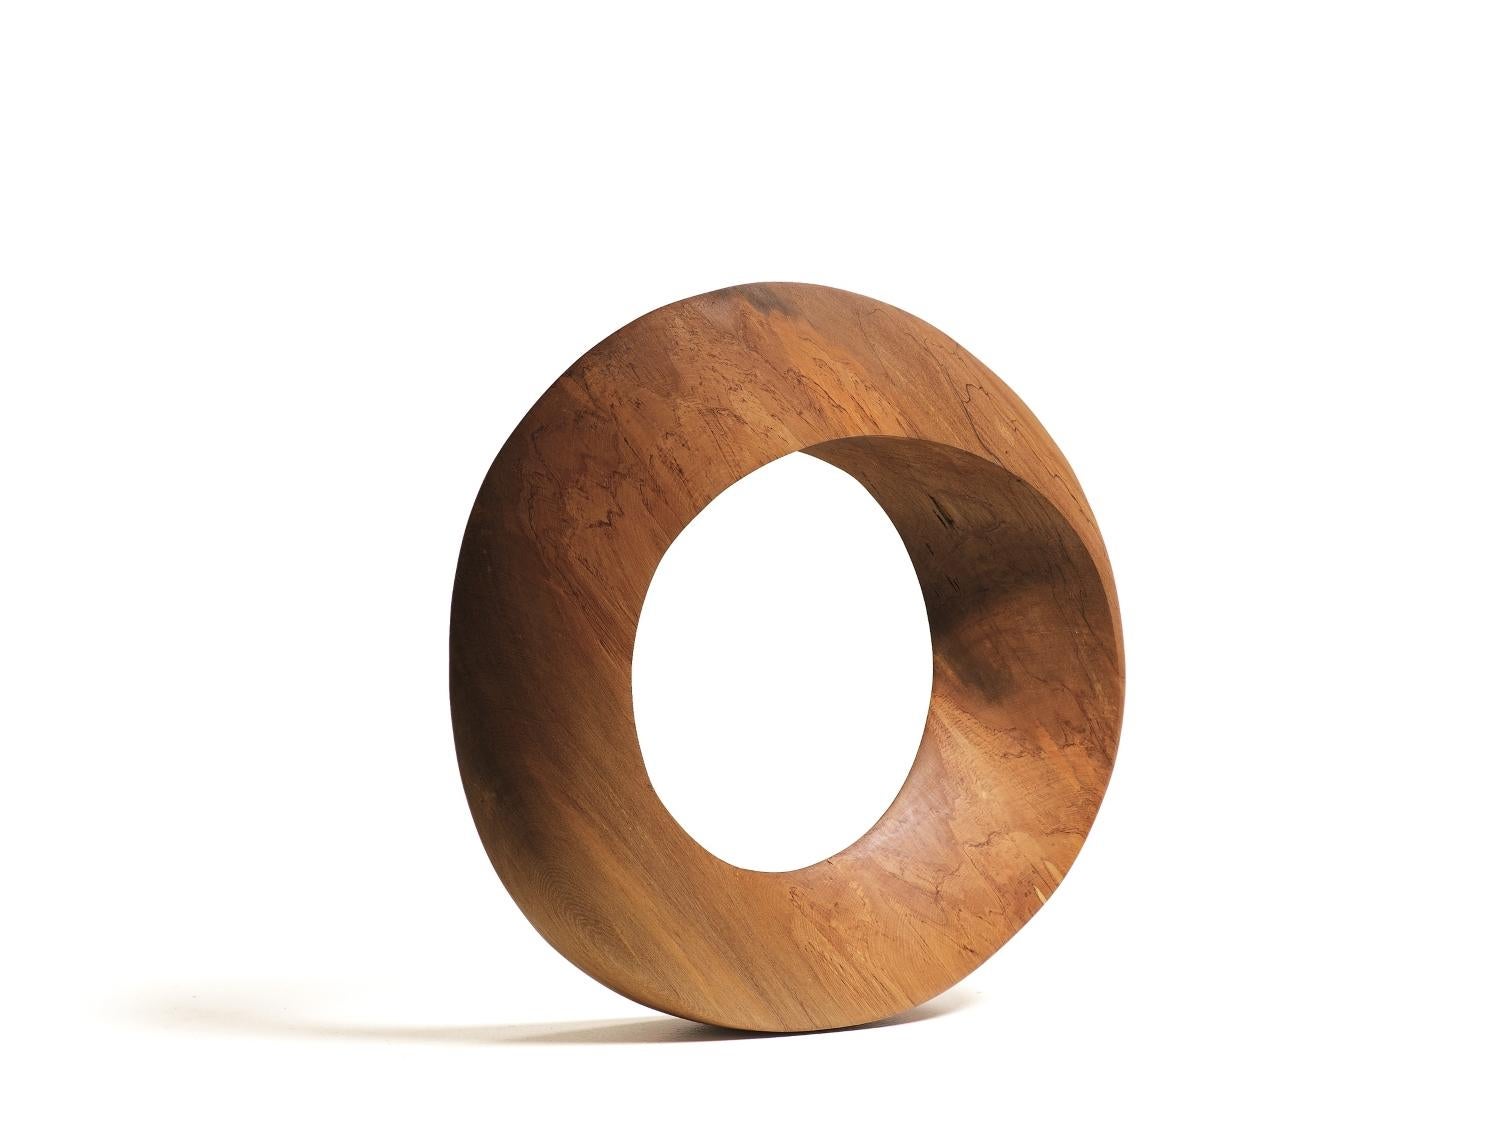 Hand-Crafted Organic Modern Mobius Sculpture in Sustainable River Rescued Ancient Wood For Sale